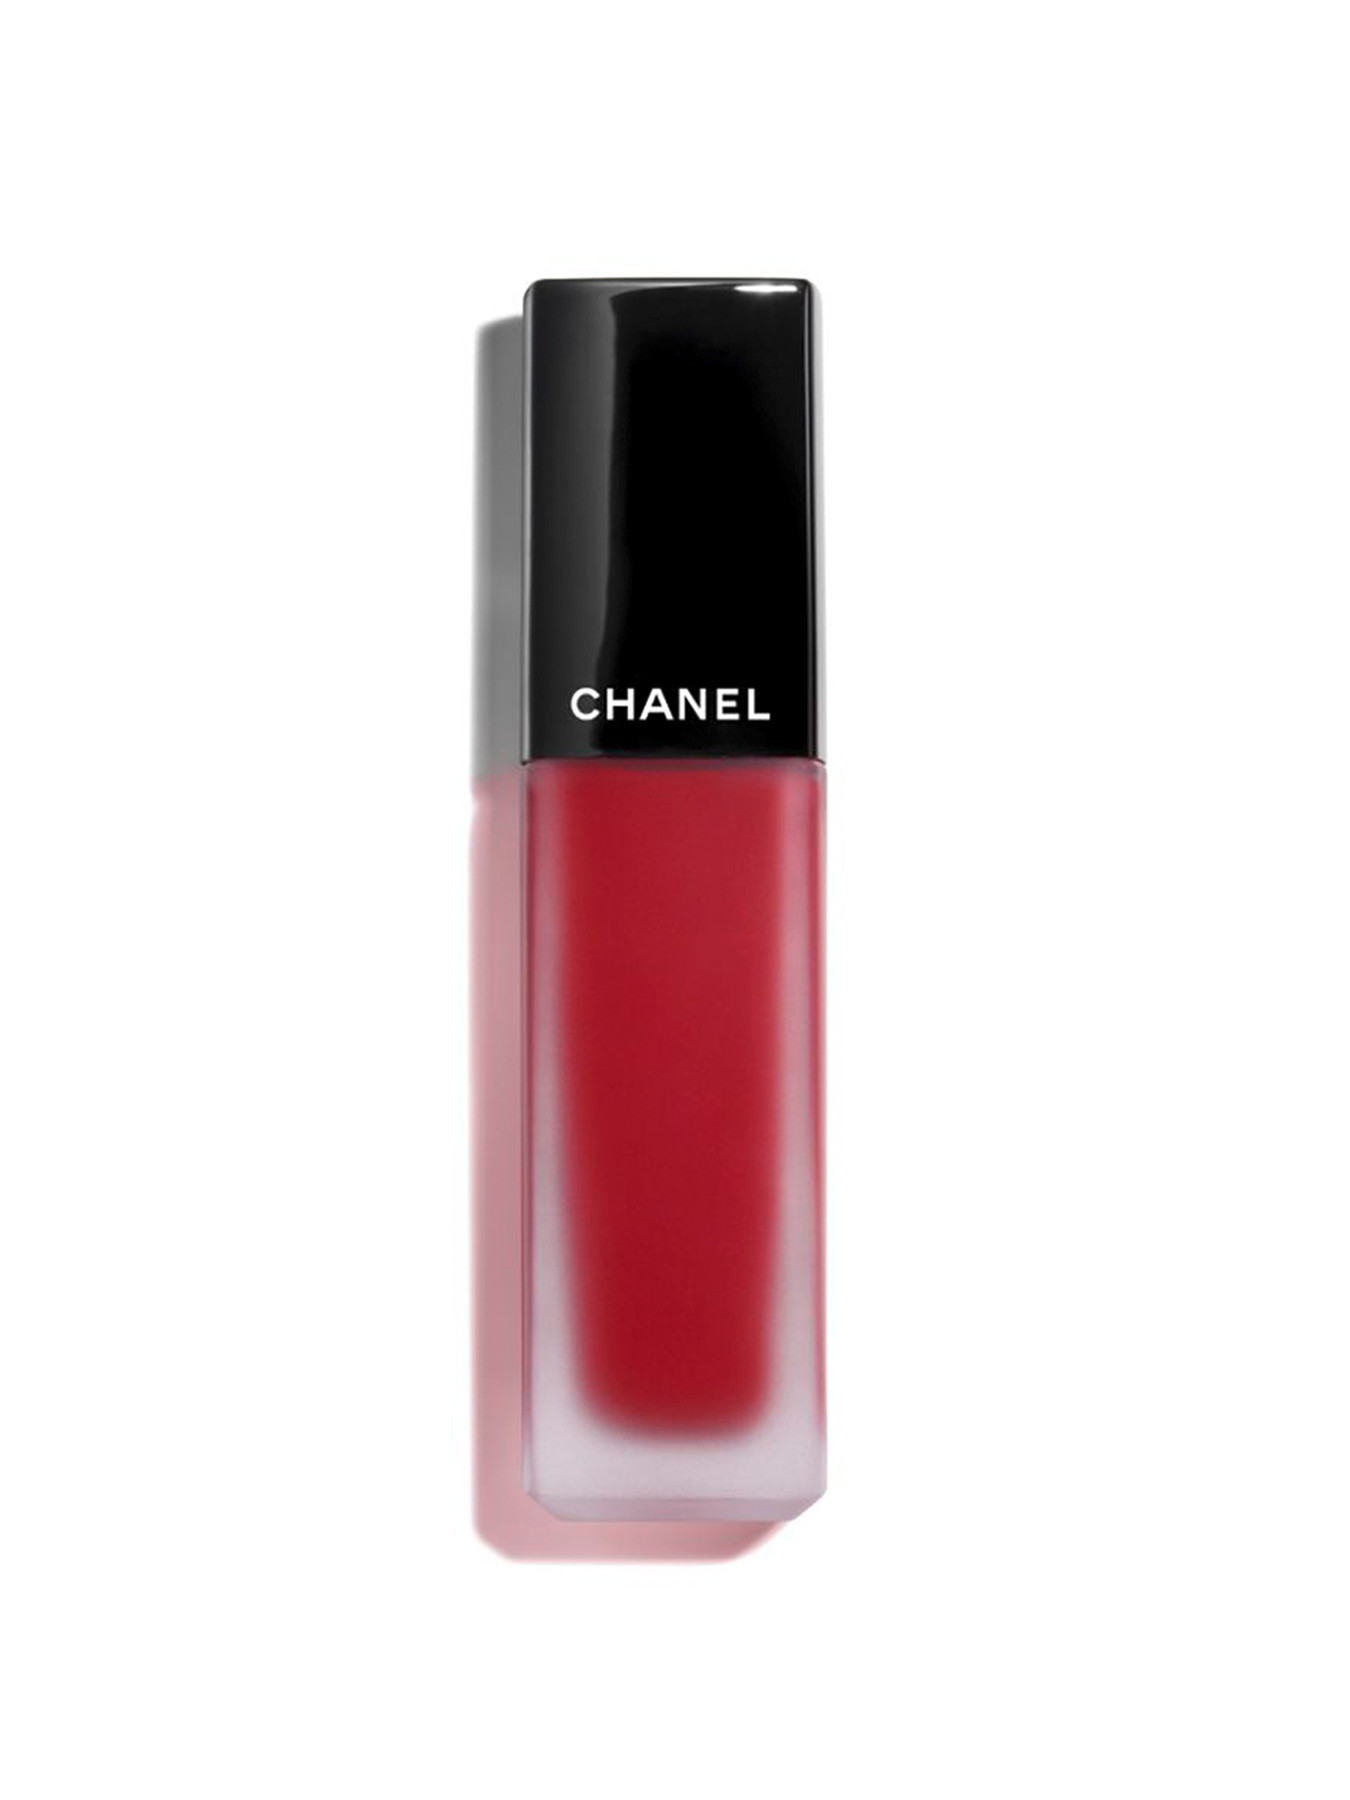 CHANEL ROUGE ALLURE INK FUSION 804 MAUVY NUDE 